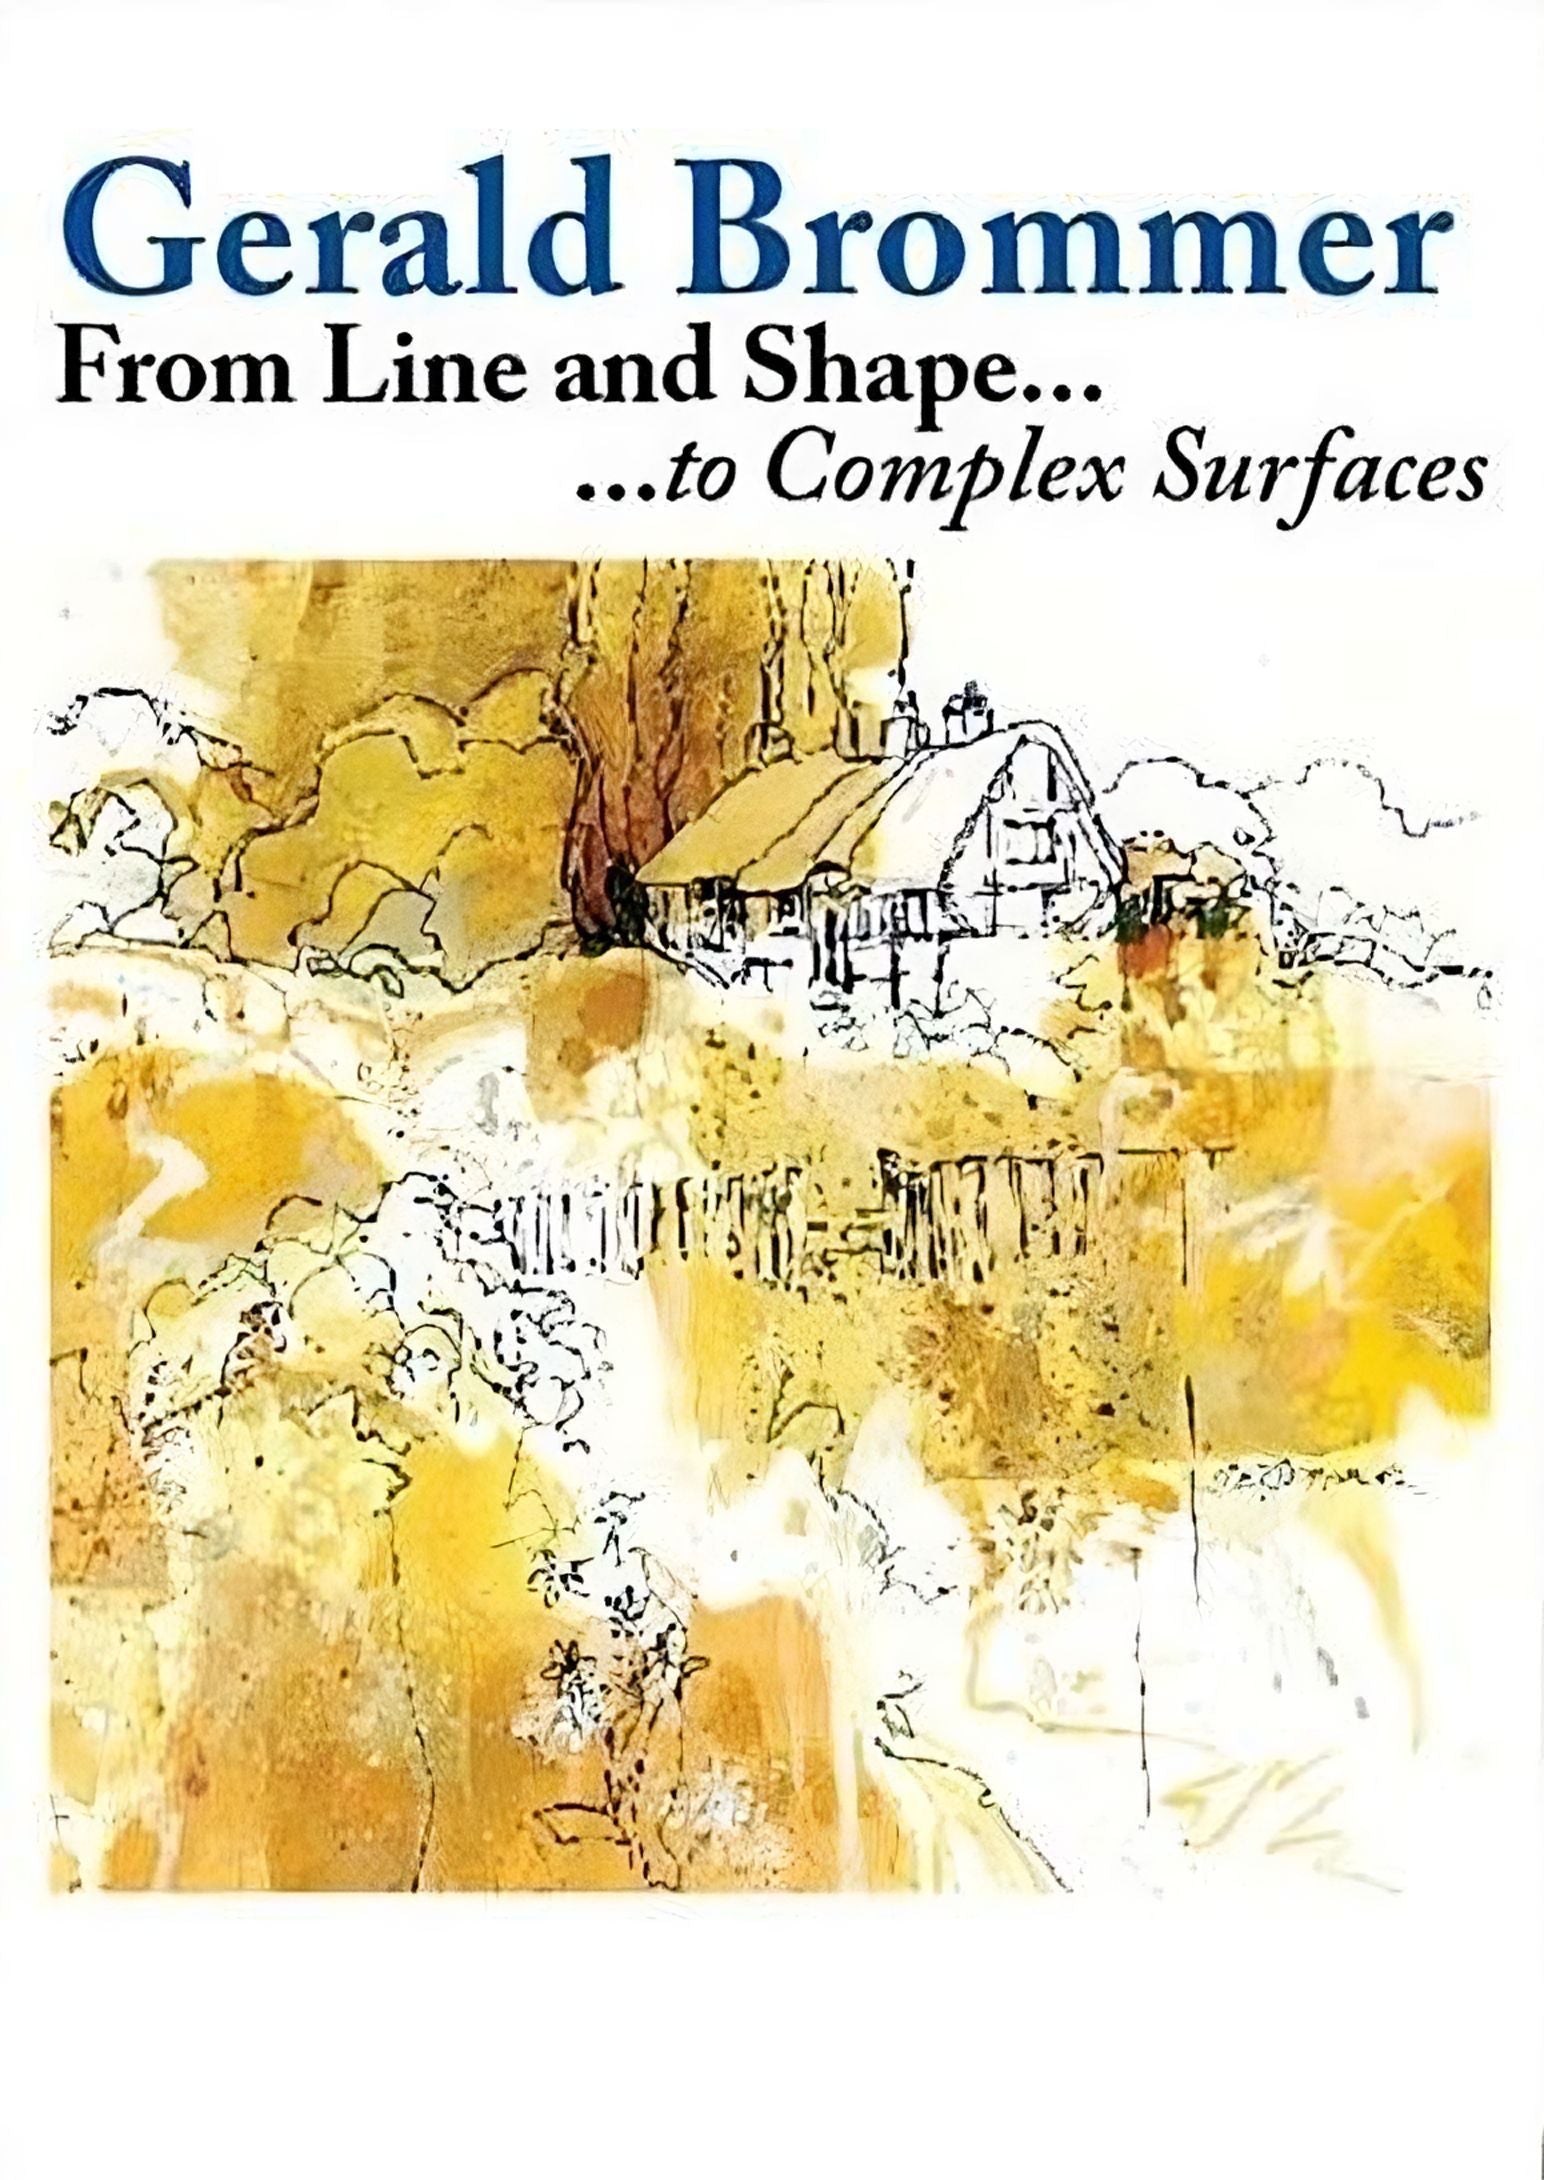 Gerald Brommer: From Line and Shape to Complex Surfaces